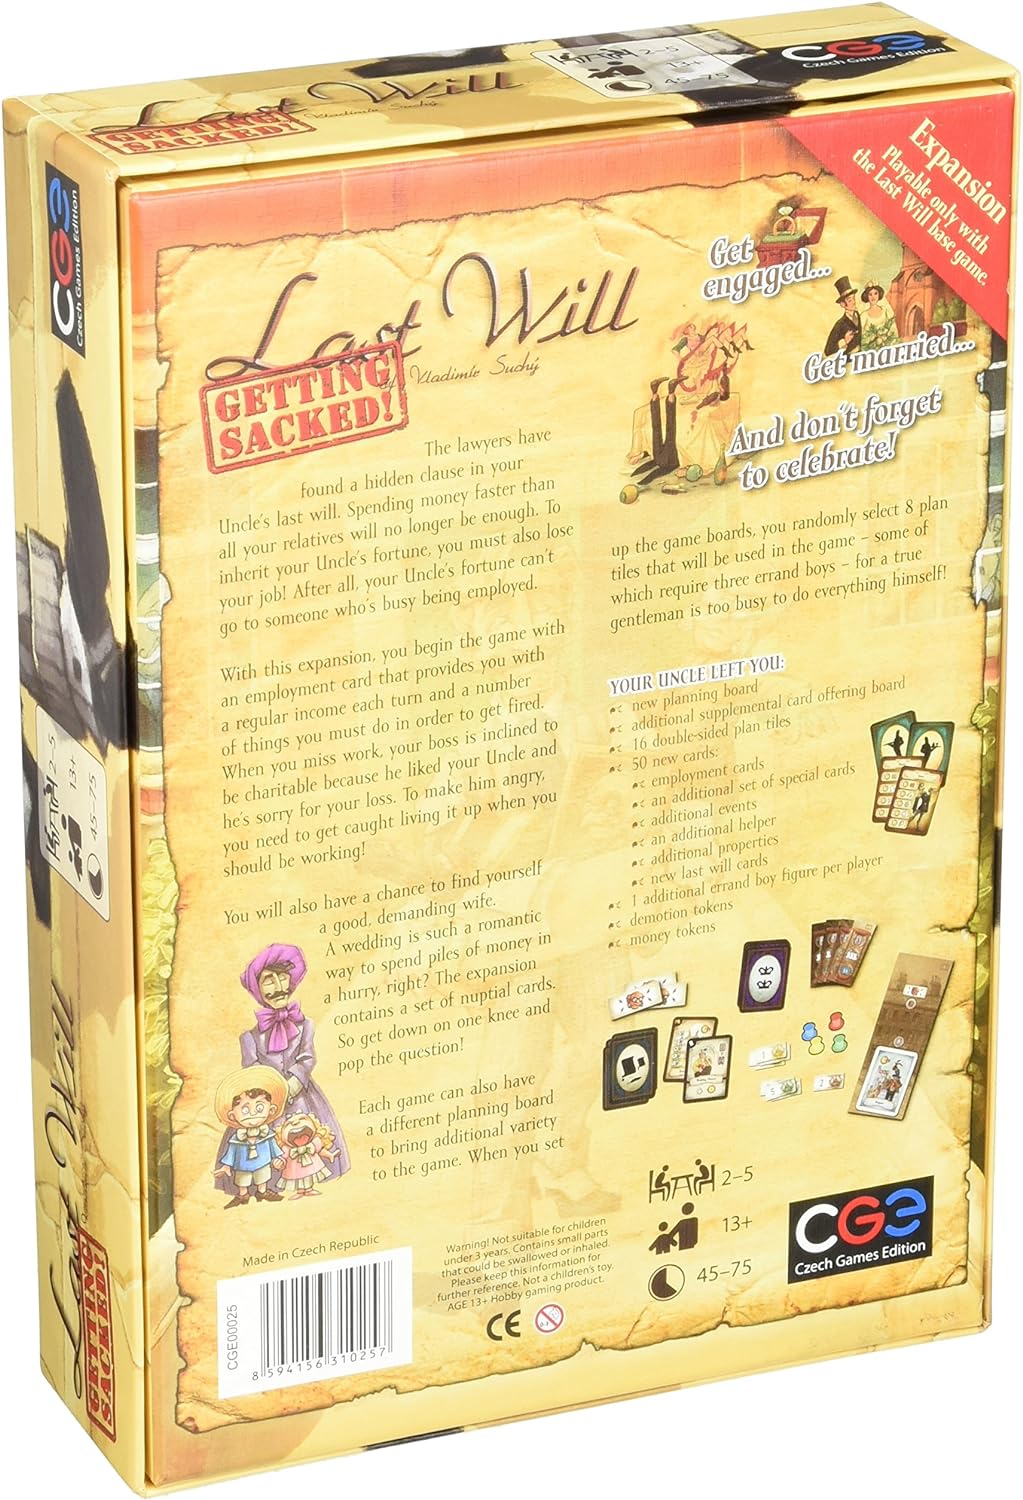 Czech Games Edition CGE00025 Last Will Getting Sacked Expansion Game